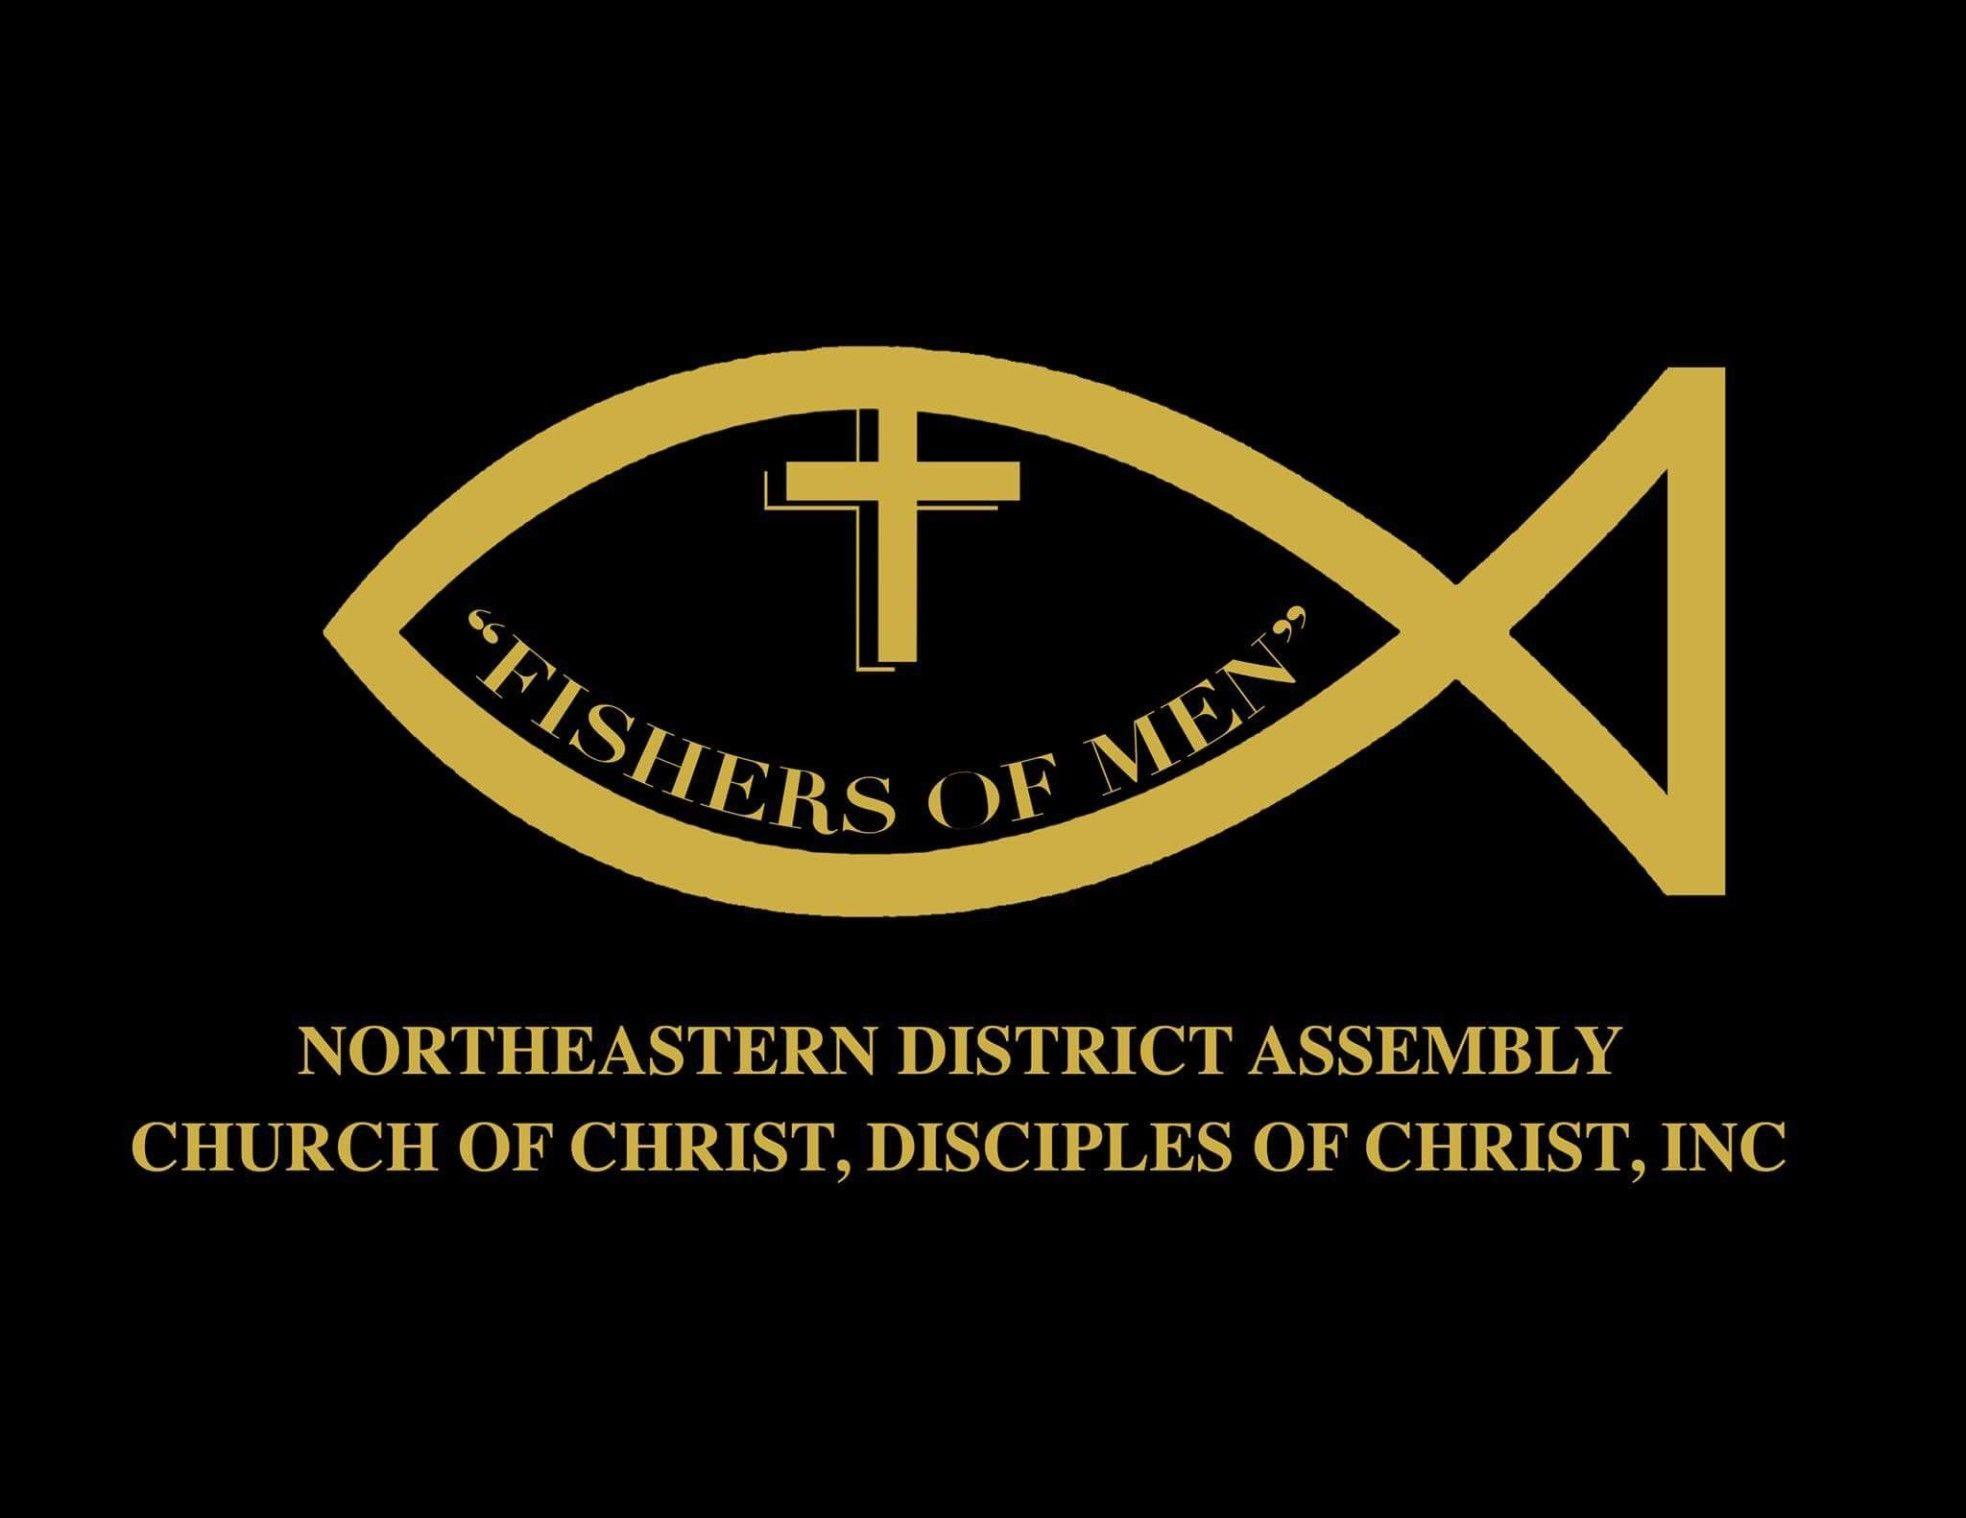 Christian Disciples Logo - The Northeastern District Assembly Church of Christ, Disciples